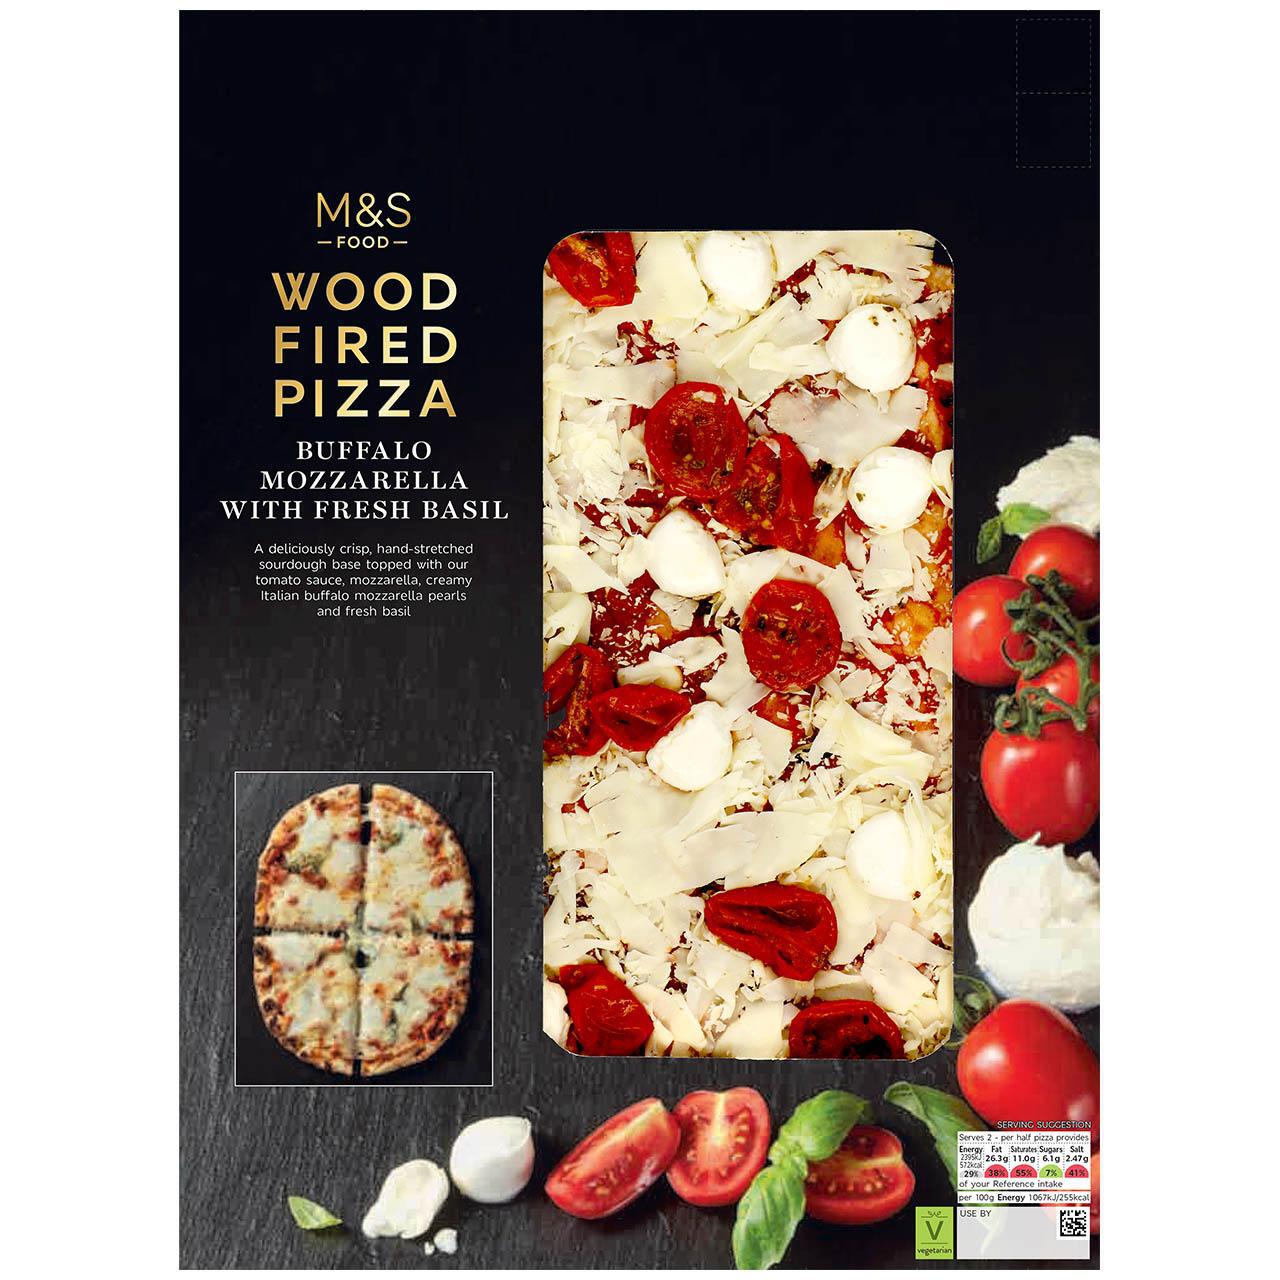 M&S Wood Fired Pizza with Buffalo Mozzarella with Fresh Basil 449g